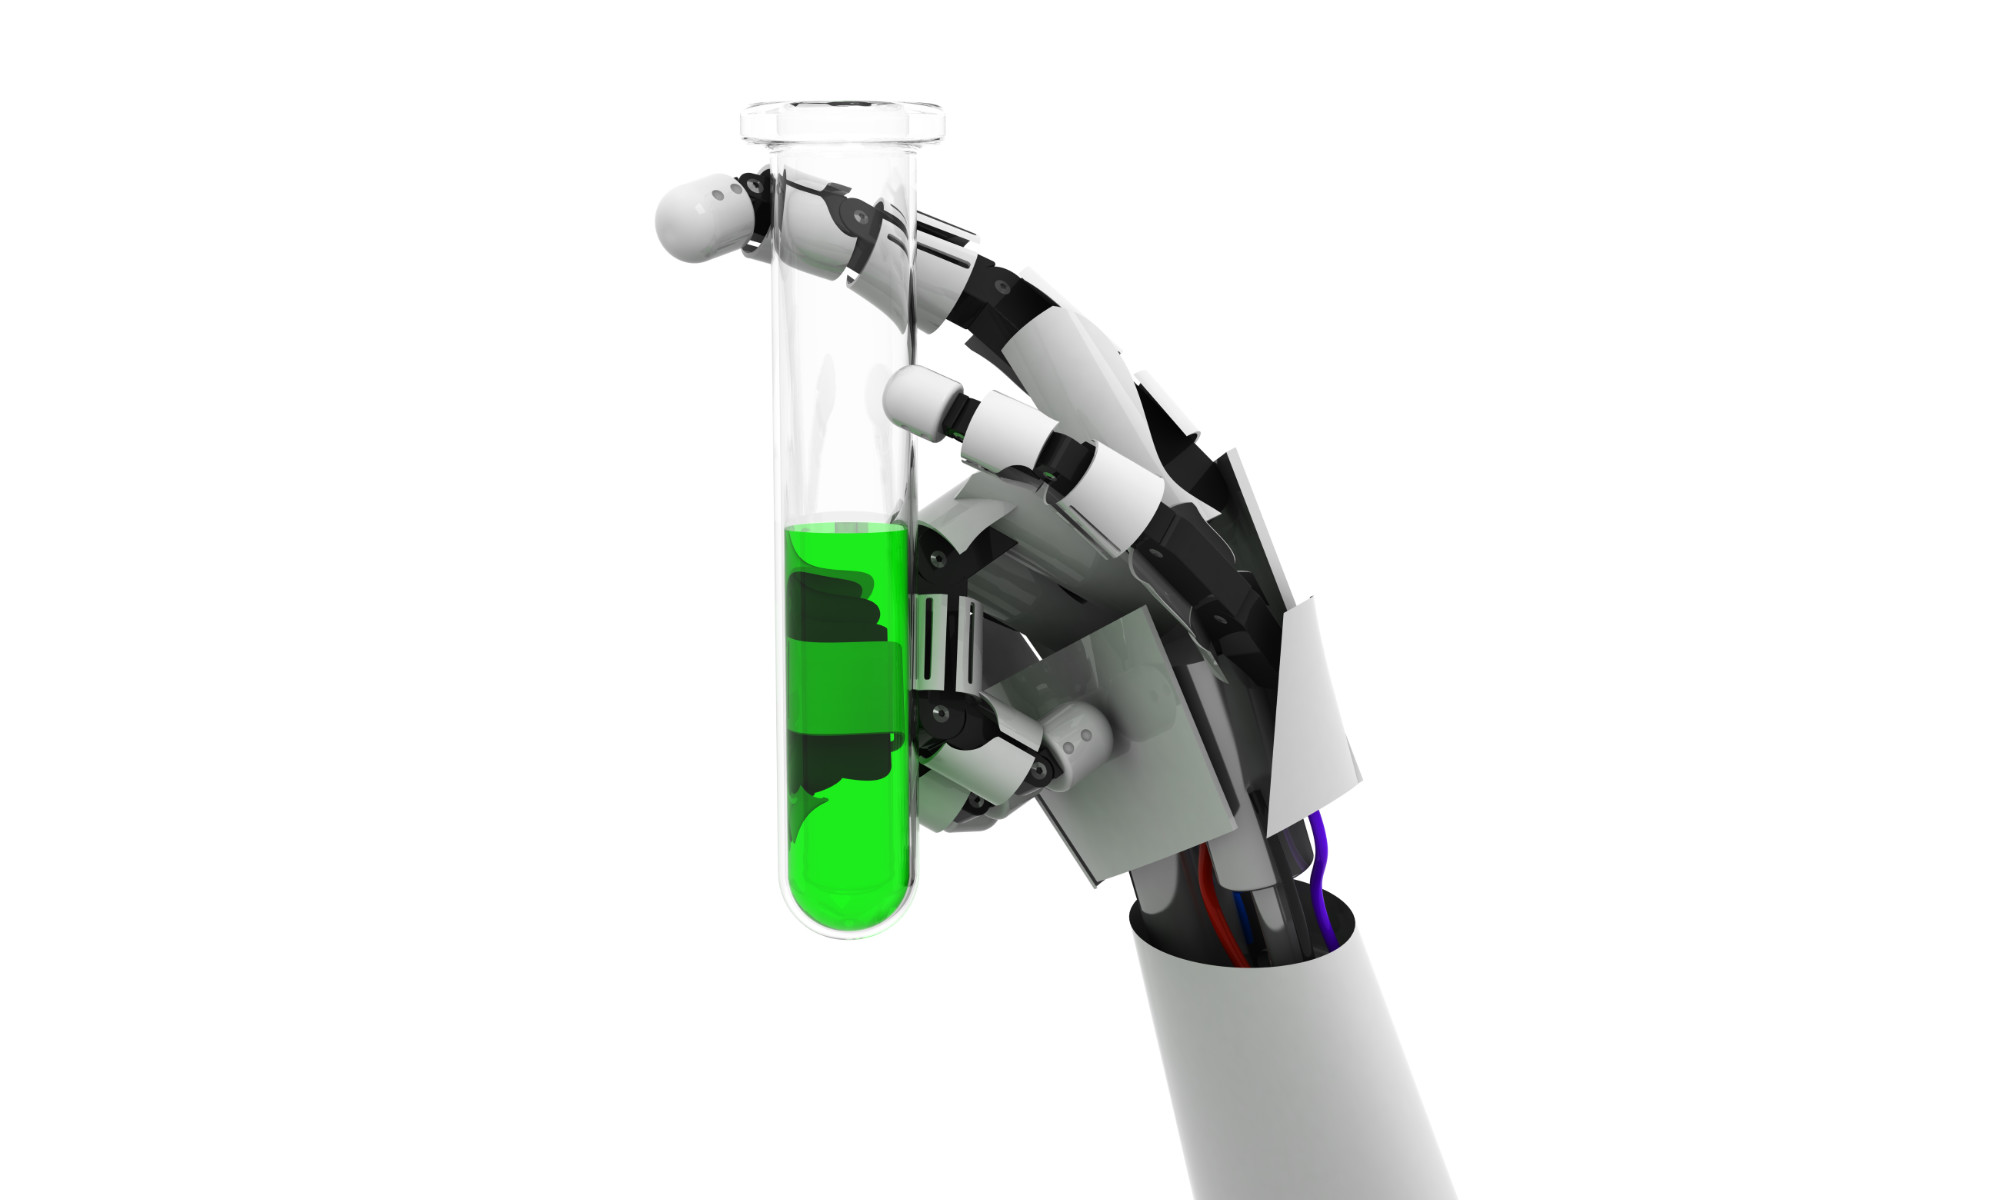 Robot's hand holds a test tube of green liquid.